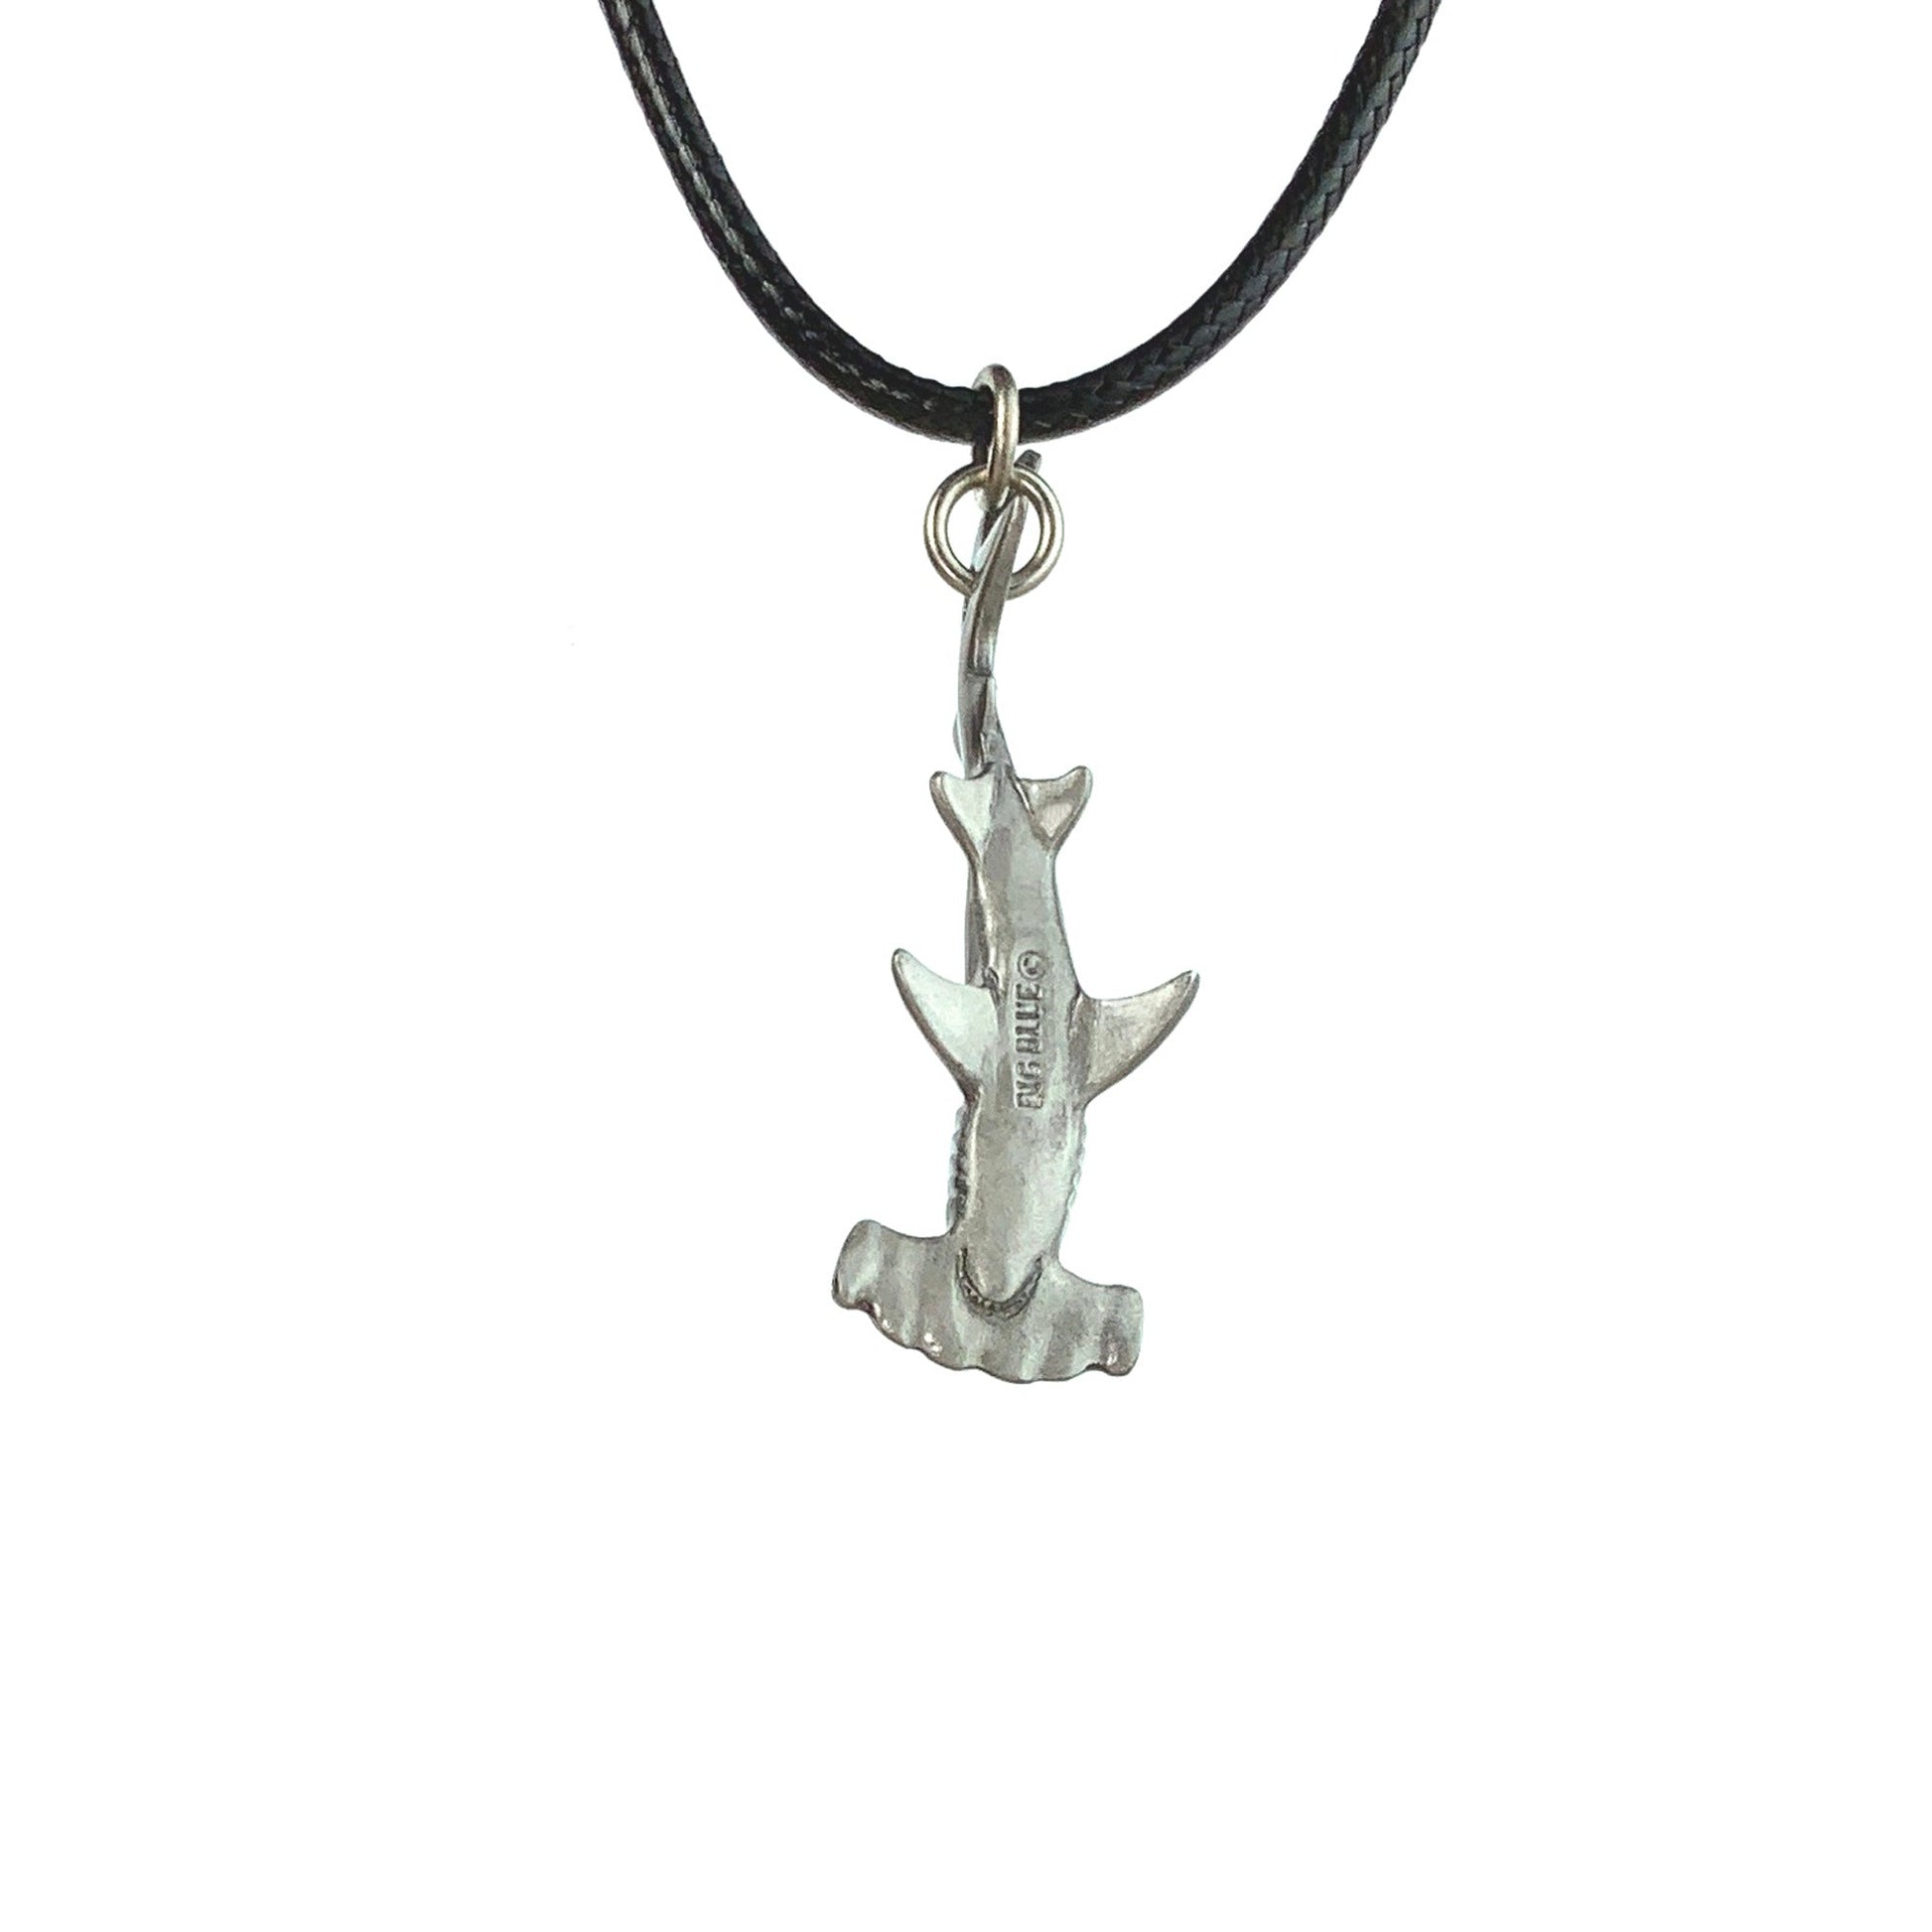 Hammerhead Shark Necklace- Shark Gifts for Women and Men, Realistic Hammerhead Shark, Gifts for Shark Lovers, Sea Life Jewelry, Realistic Shark Charm - The Tool Store